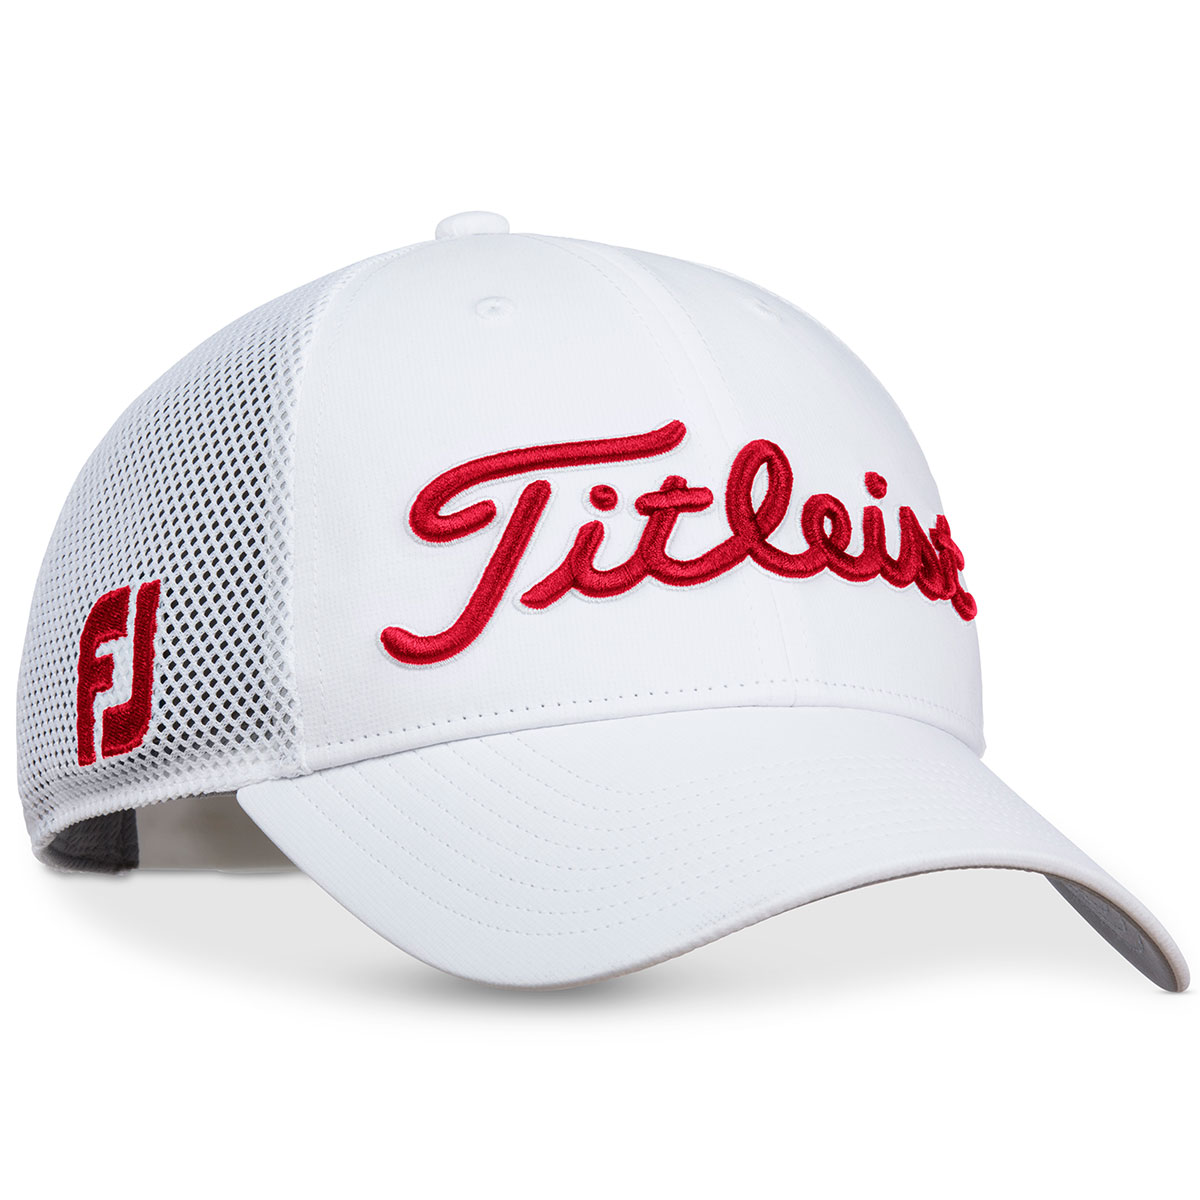 Titleist Tour Performance Mesh Back Cap from american golf